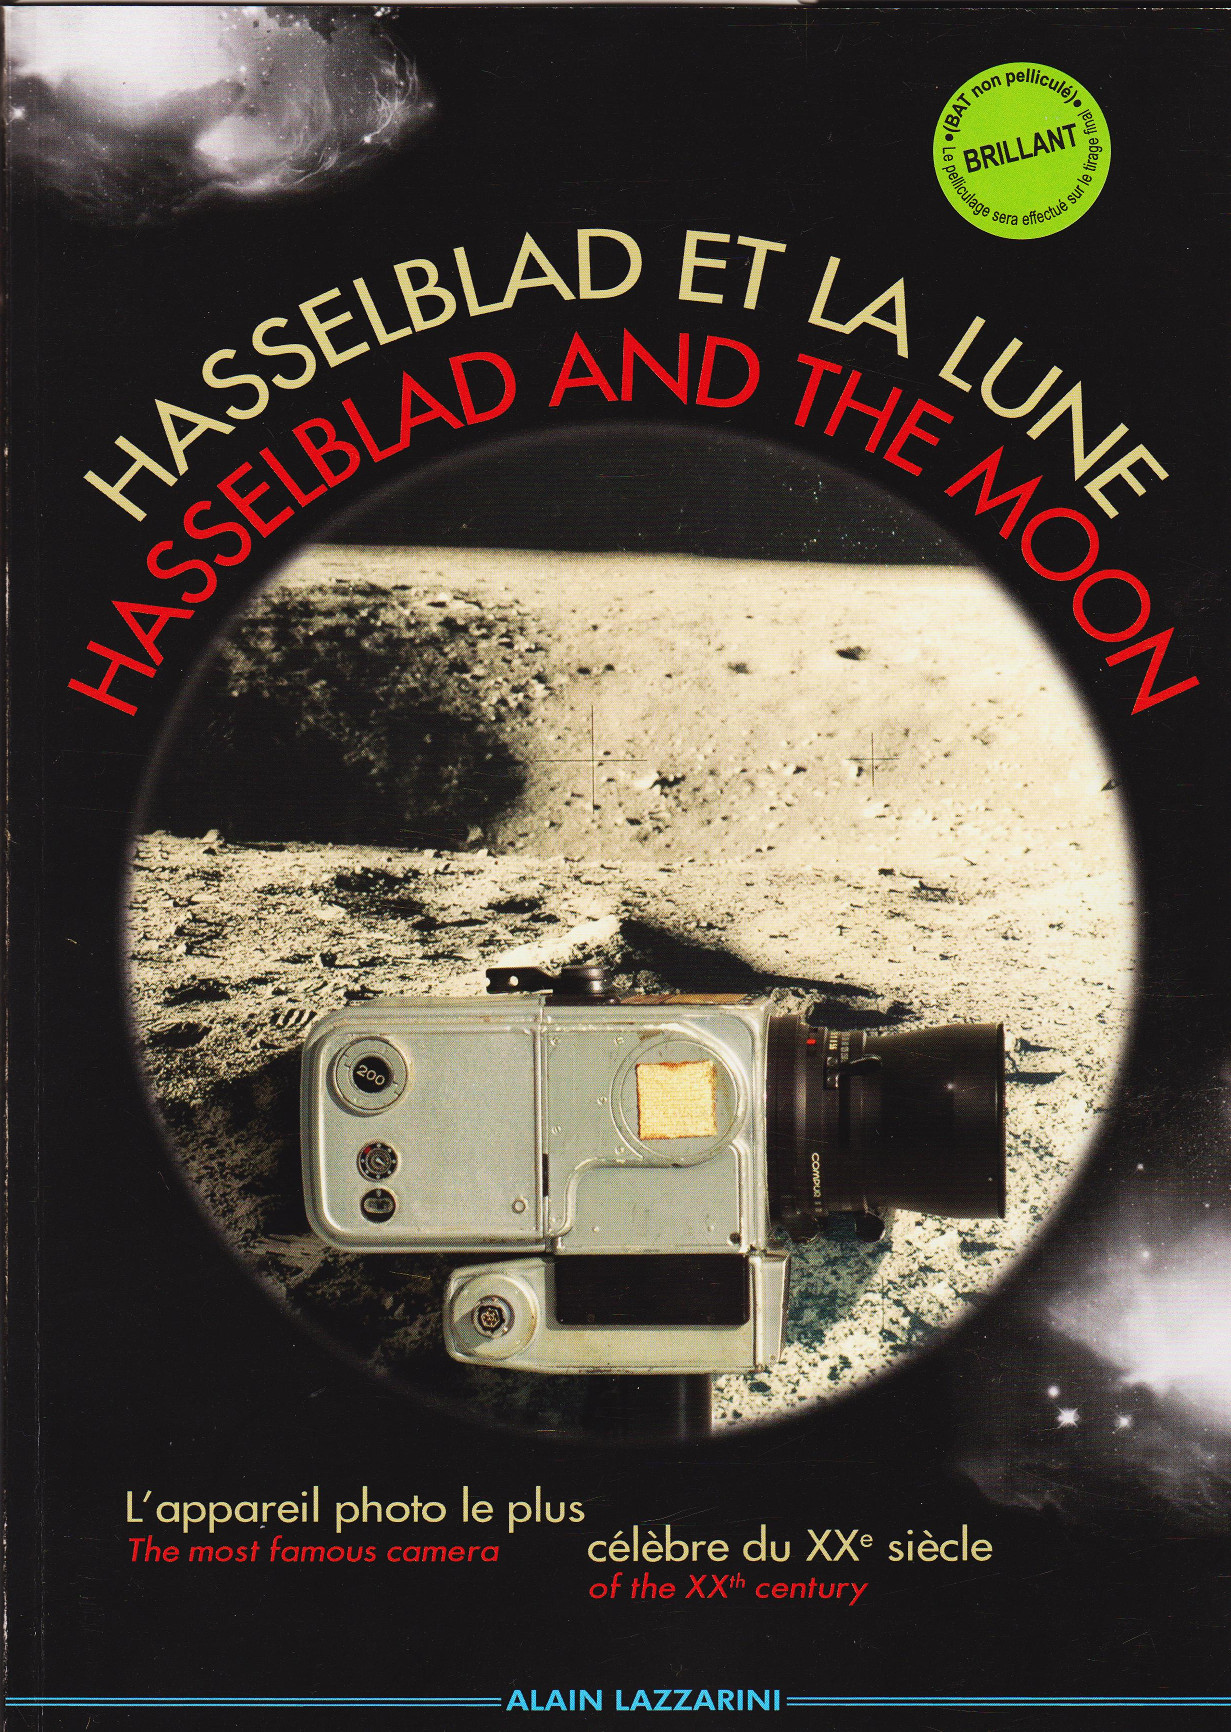 Hasselblad and the Moon - Cover page